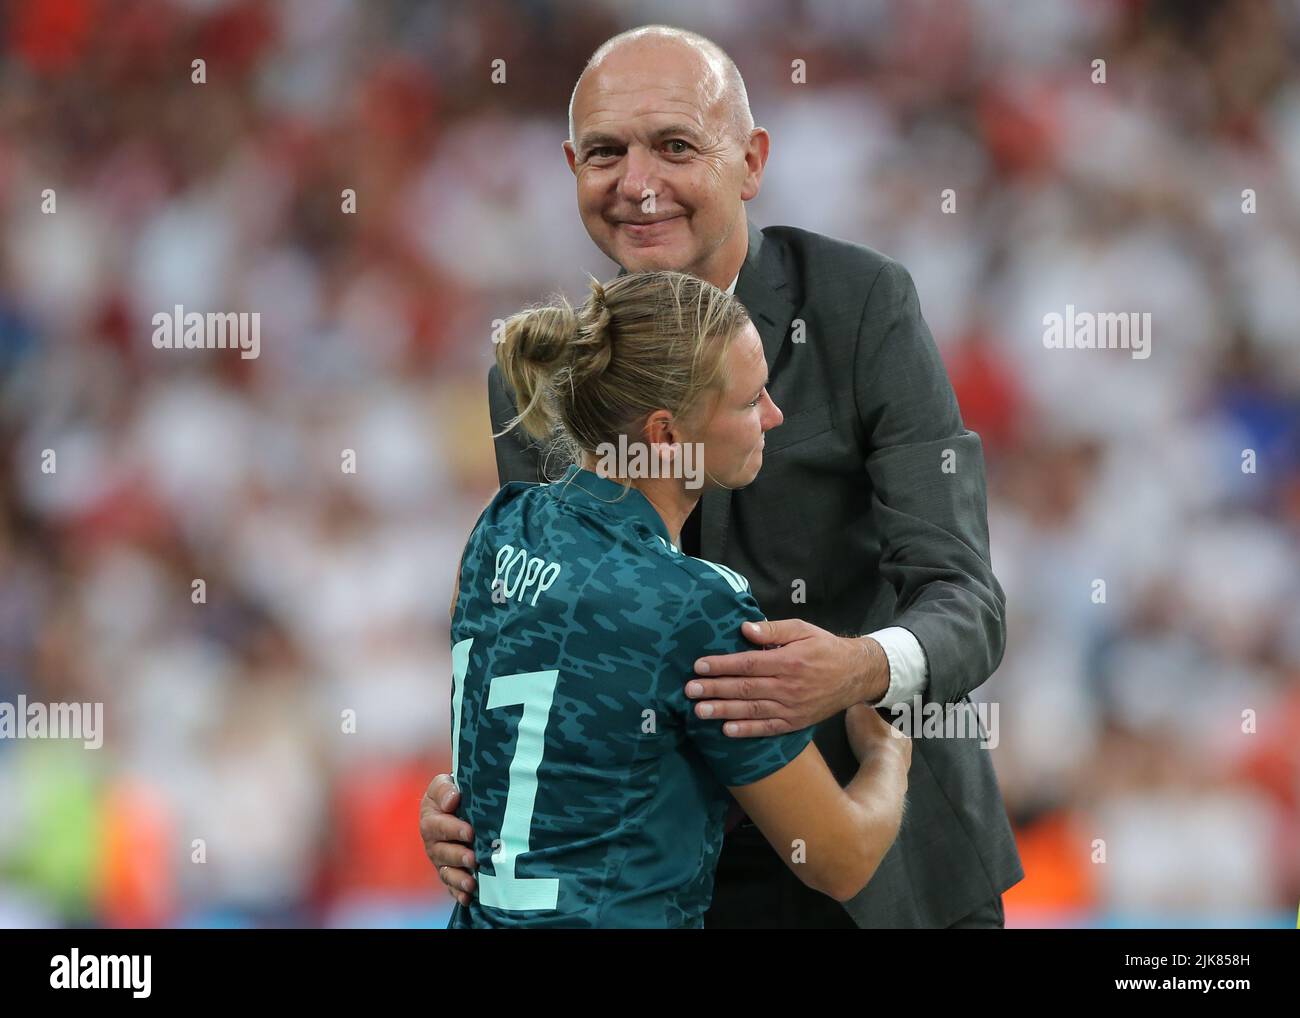 London, UK. 31st July, 2022. Bernd Neuendorf President of German Football Association embraces Alexandra Popp of Germany following the final whistle of the UEFA Women's European Championship 2022 match at Wembley Stadium, London. Picture credit should read: Jonathan Moscrop/Sportimage Credit: Sportimage/Alamy Live News Stock Photo